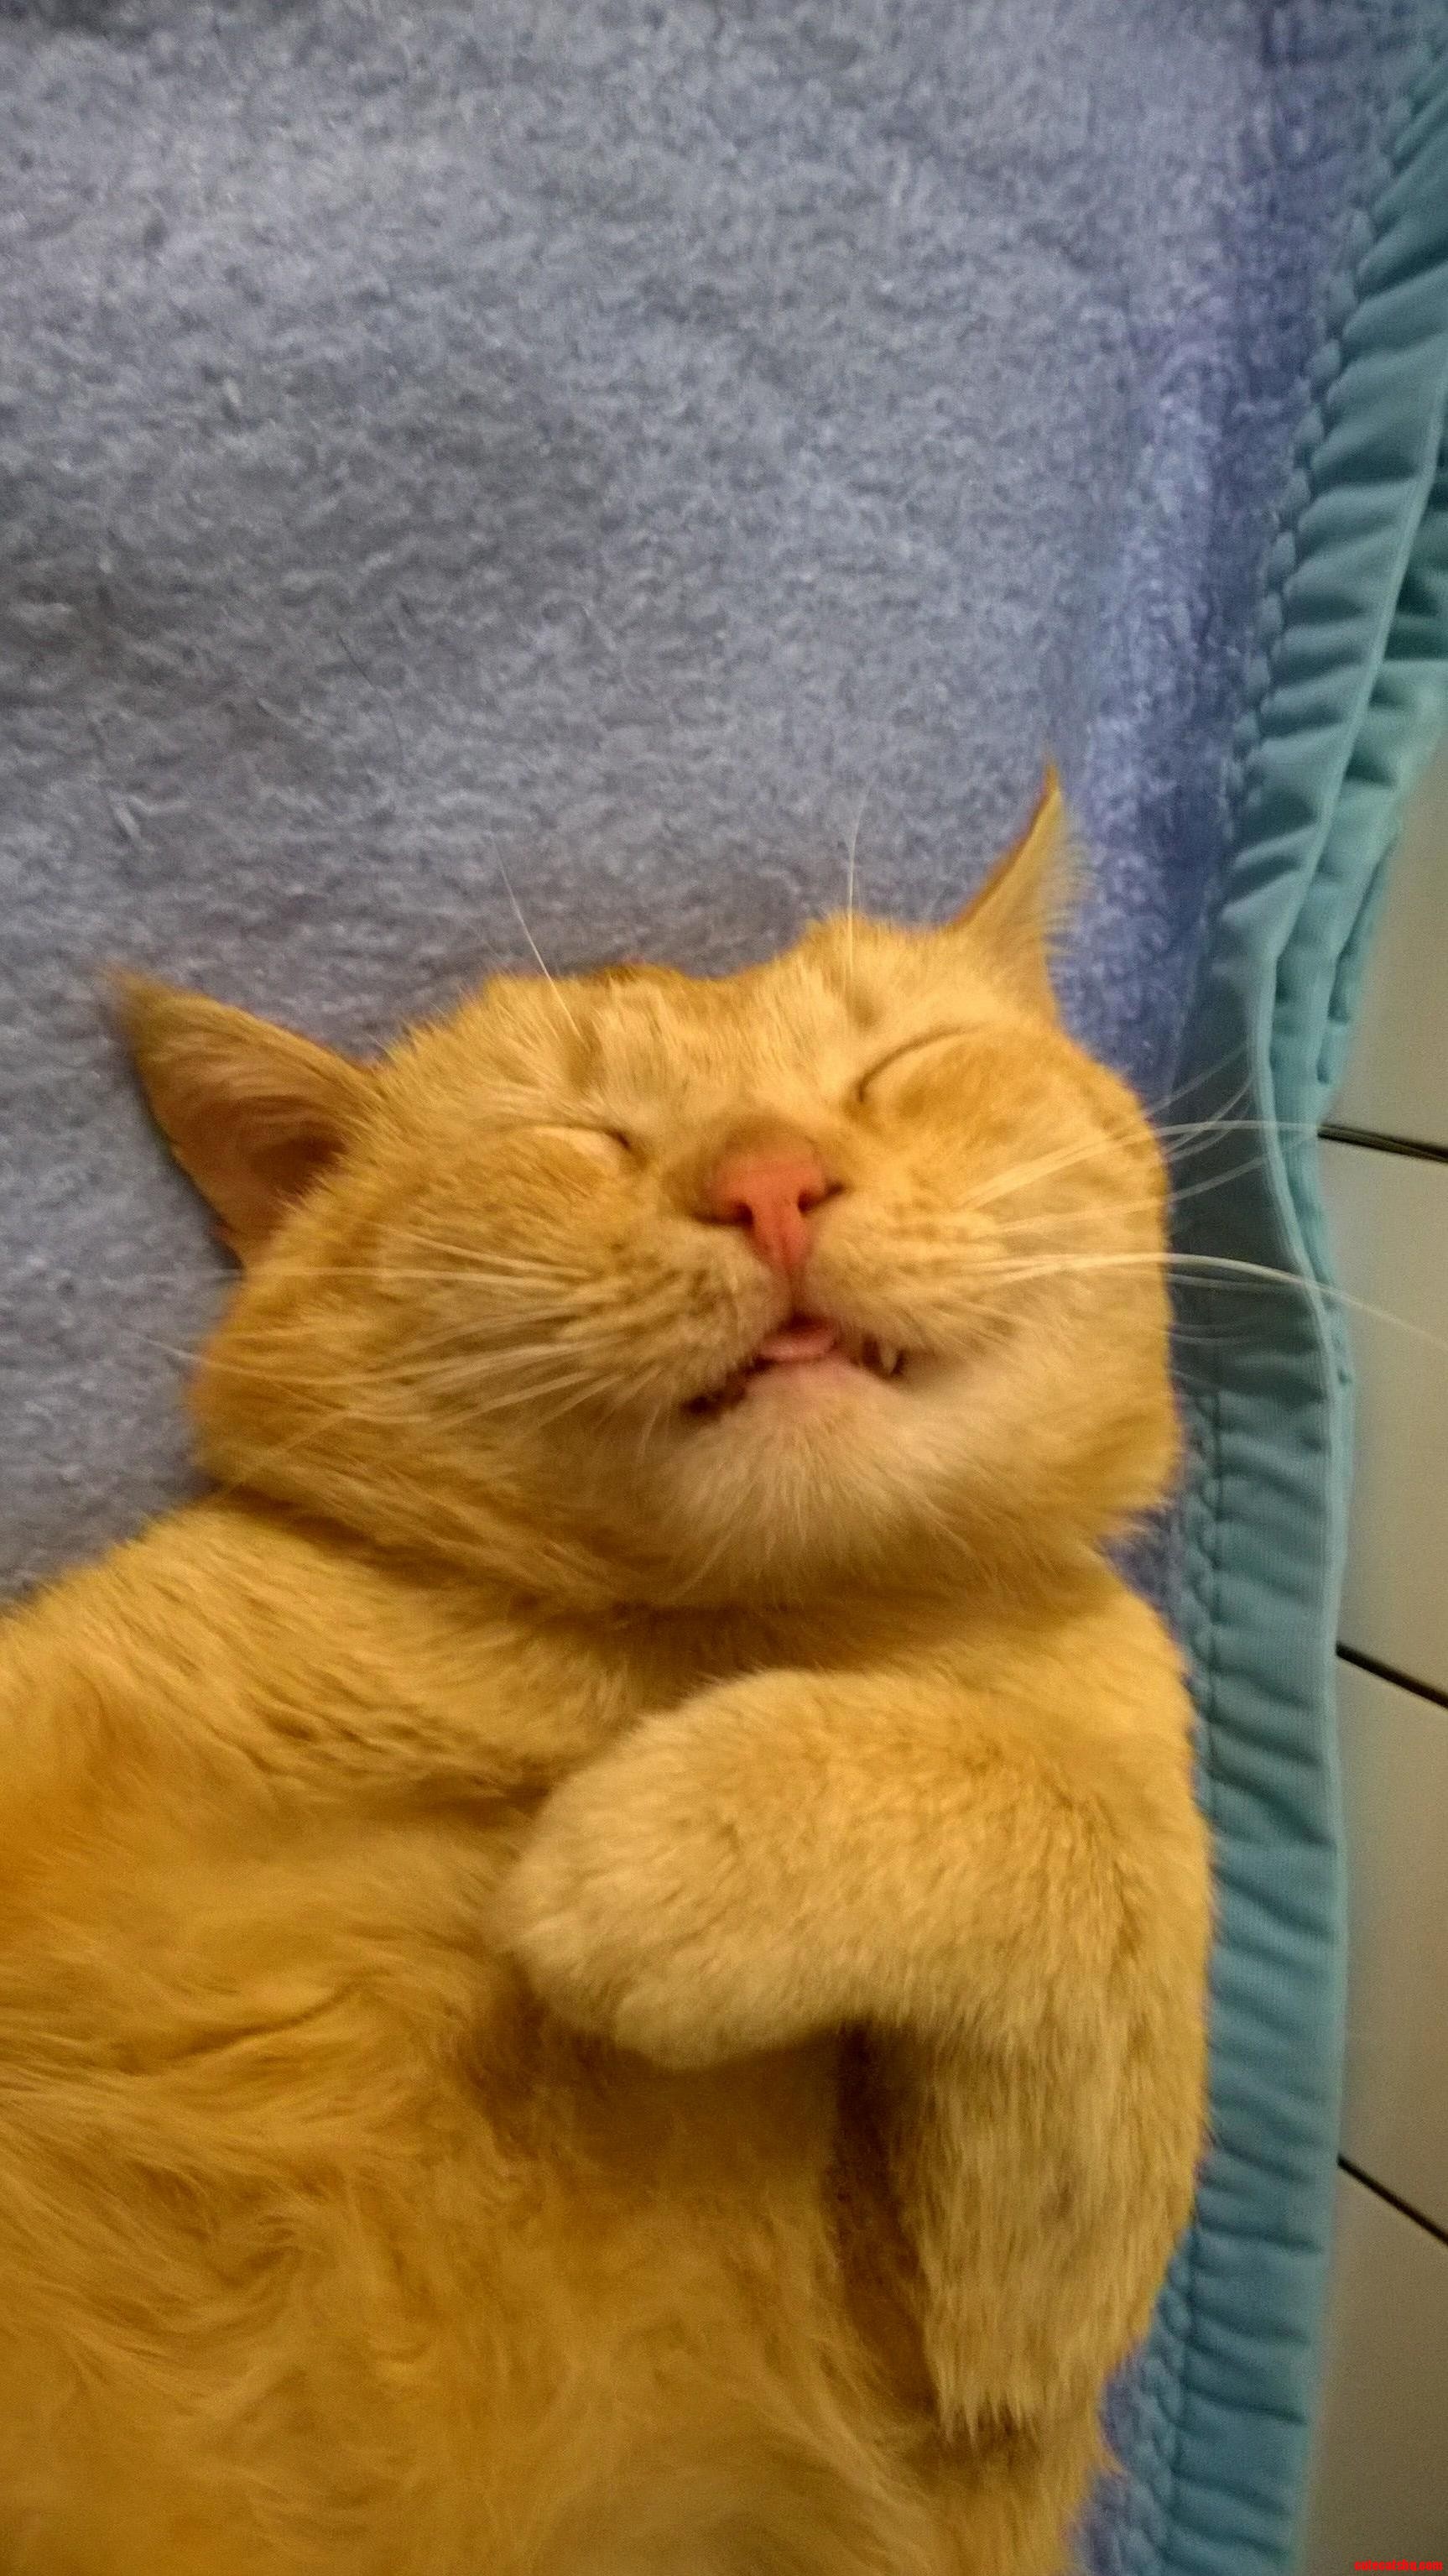 This is how my cat looks like when he sleeps